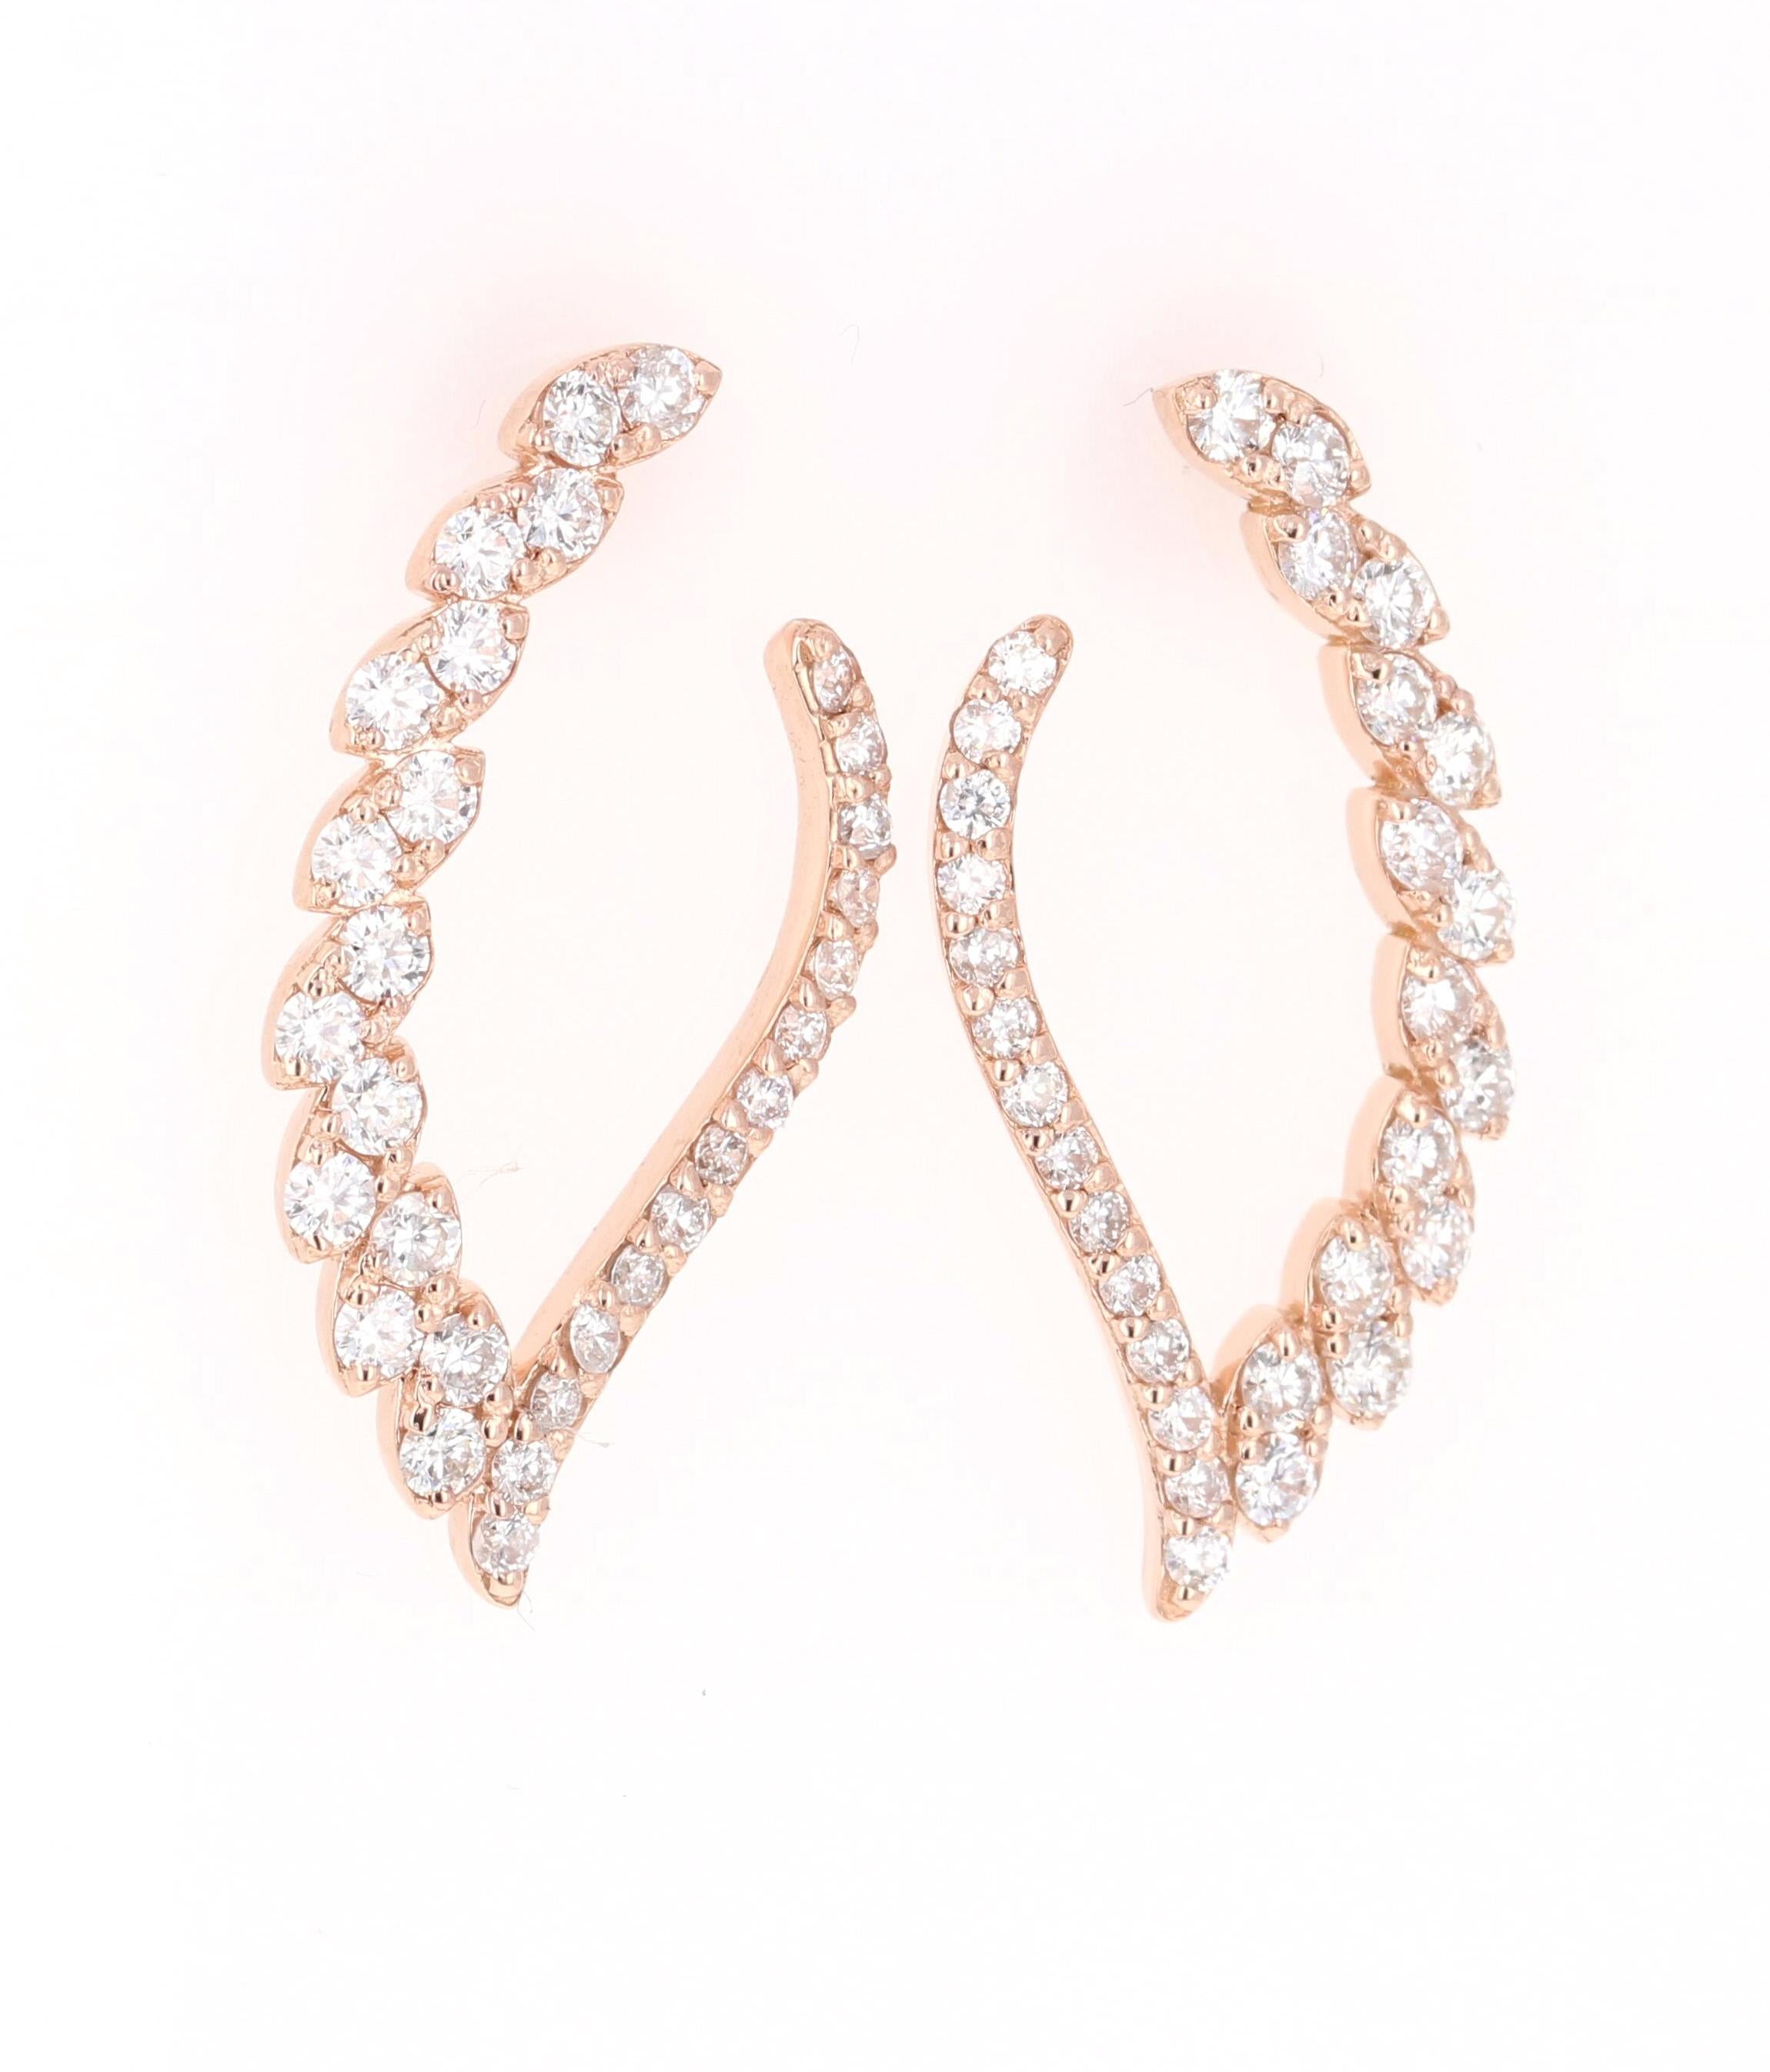 Delicate and Darling Diamond Dazzlers!
These beauties can be worn formally or even casually. 
60 Round Cut Diamonds weighing 1.50 Carats, Clarity: SI, Color: F
14 Karat Rose Gold, 4.6 grams 

1 inch long. 